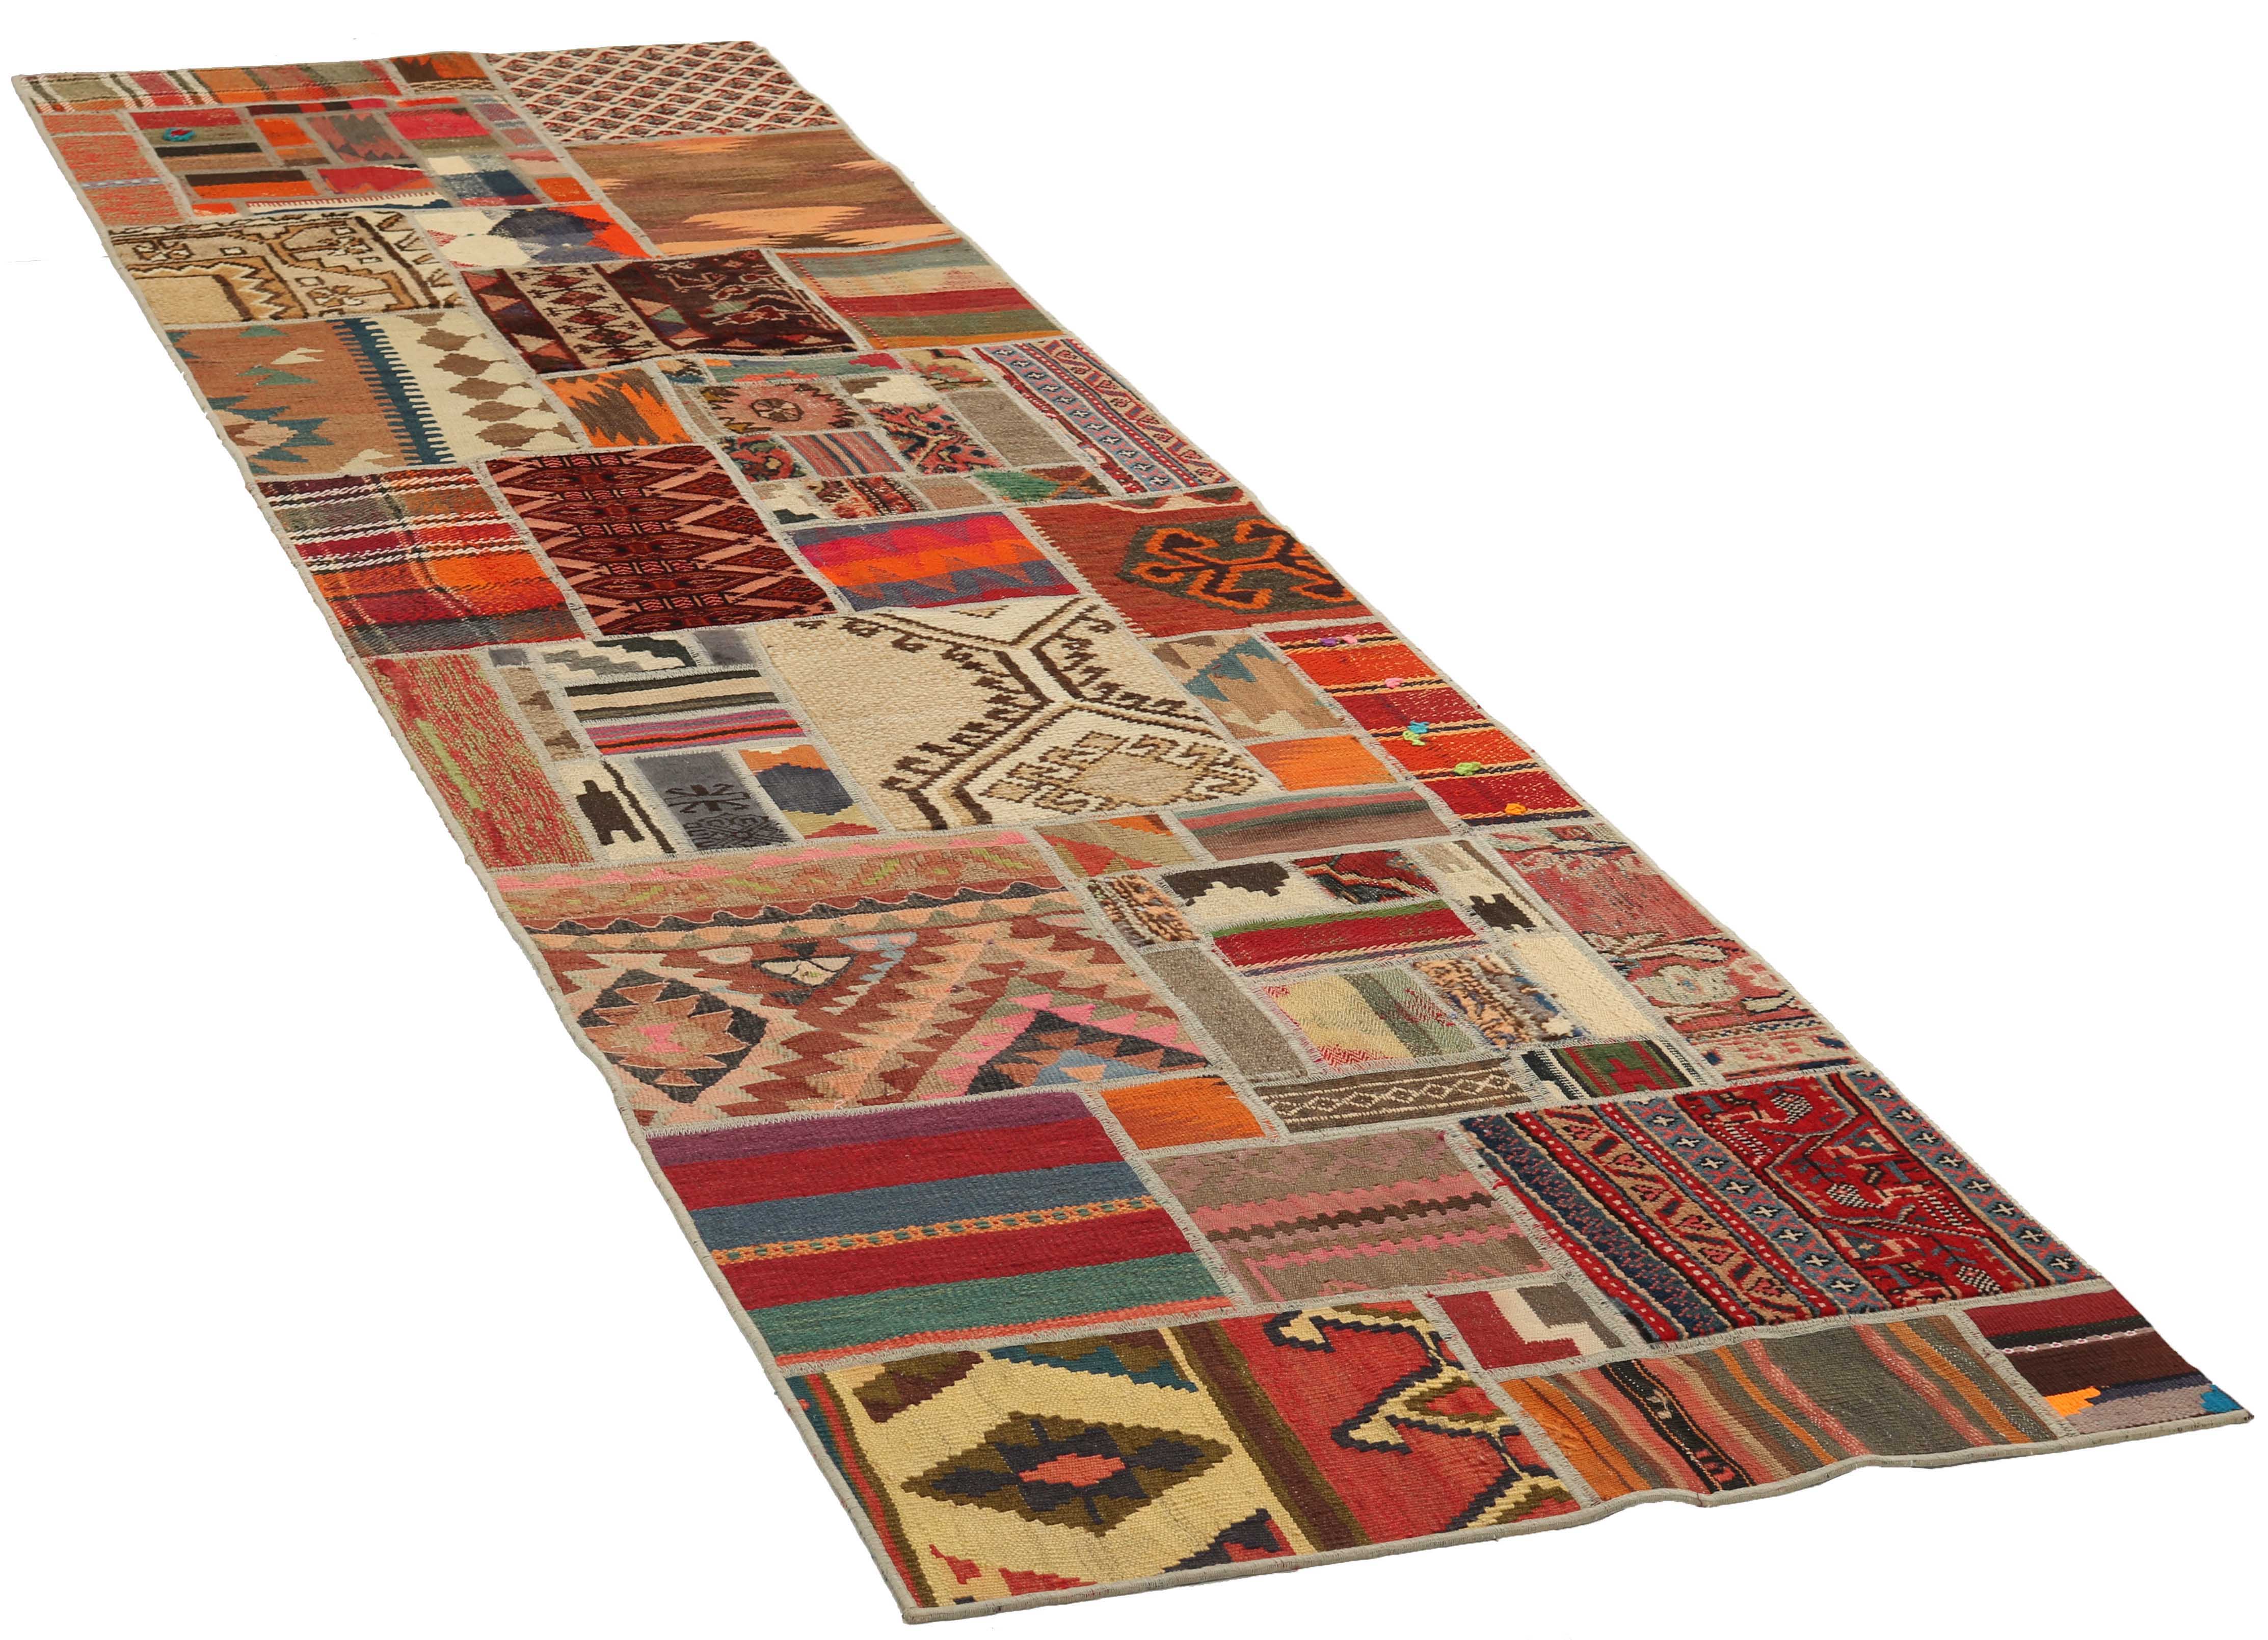 Authentic red patchwork persian runner